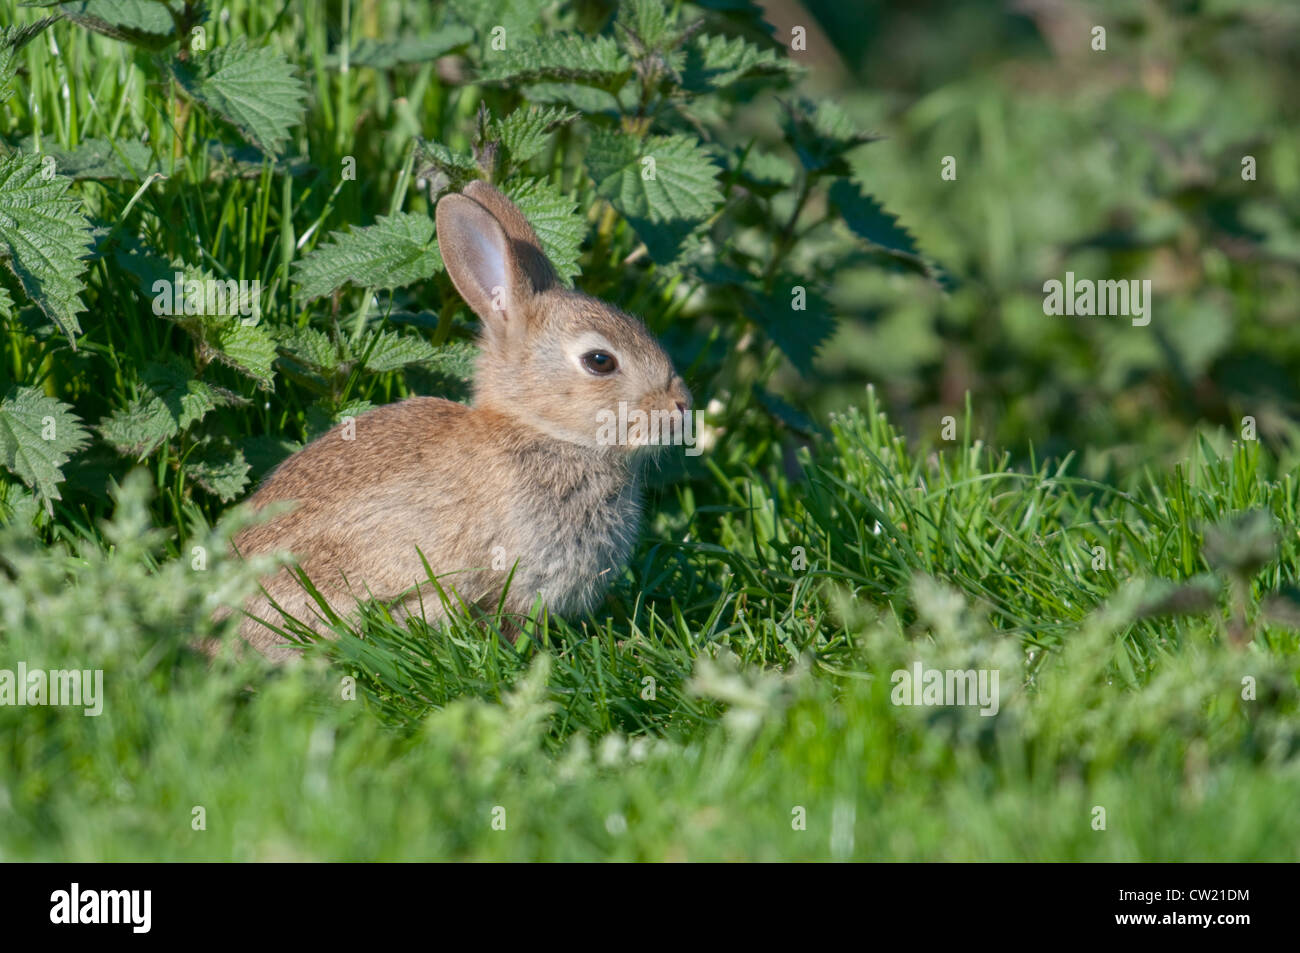 Rabbit Kit peeks out from the entrance of the burrow amongst stinging nettles, Fairlight, Sussex, UK Stock Photo